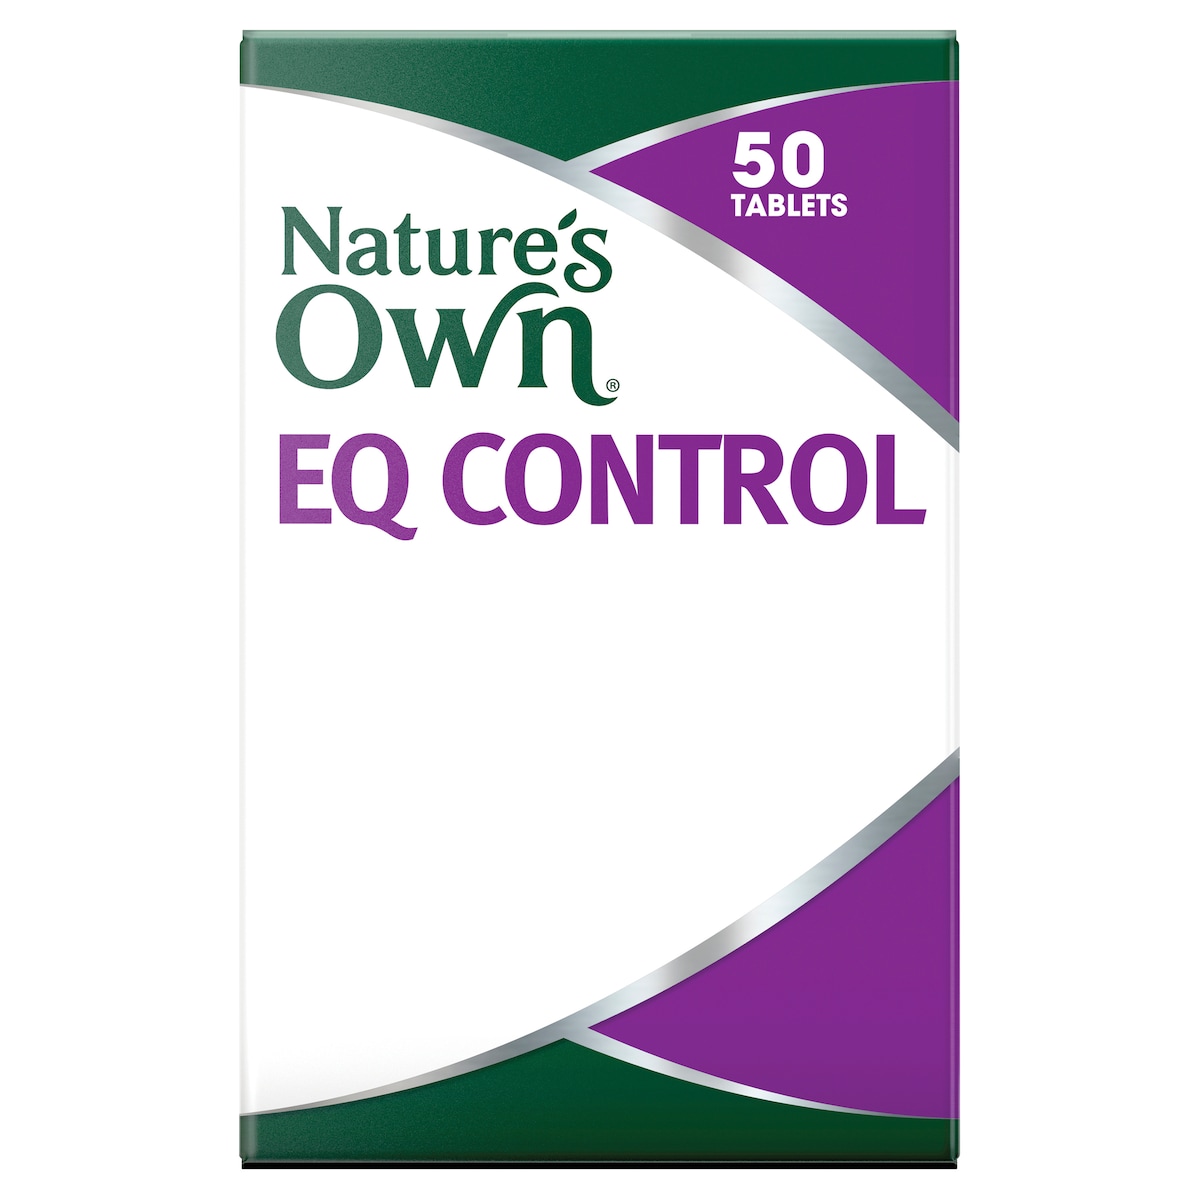 Nature's Own Eq Control 50 Tablets